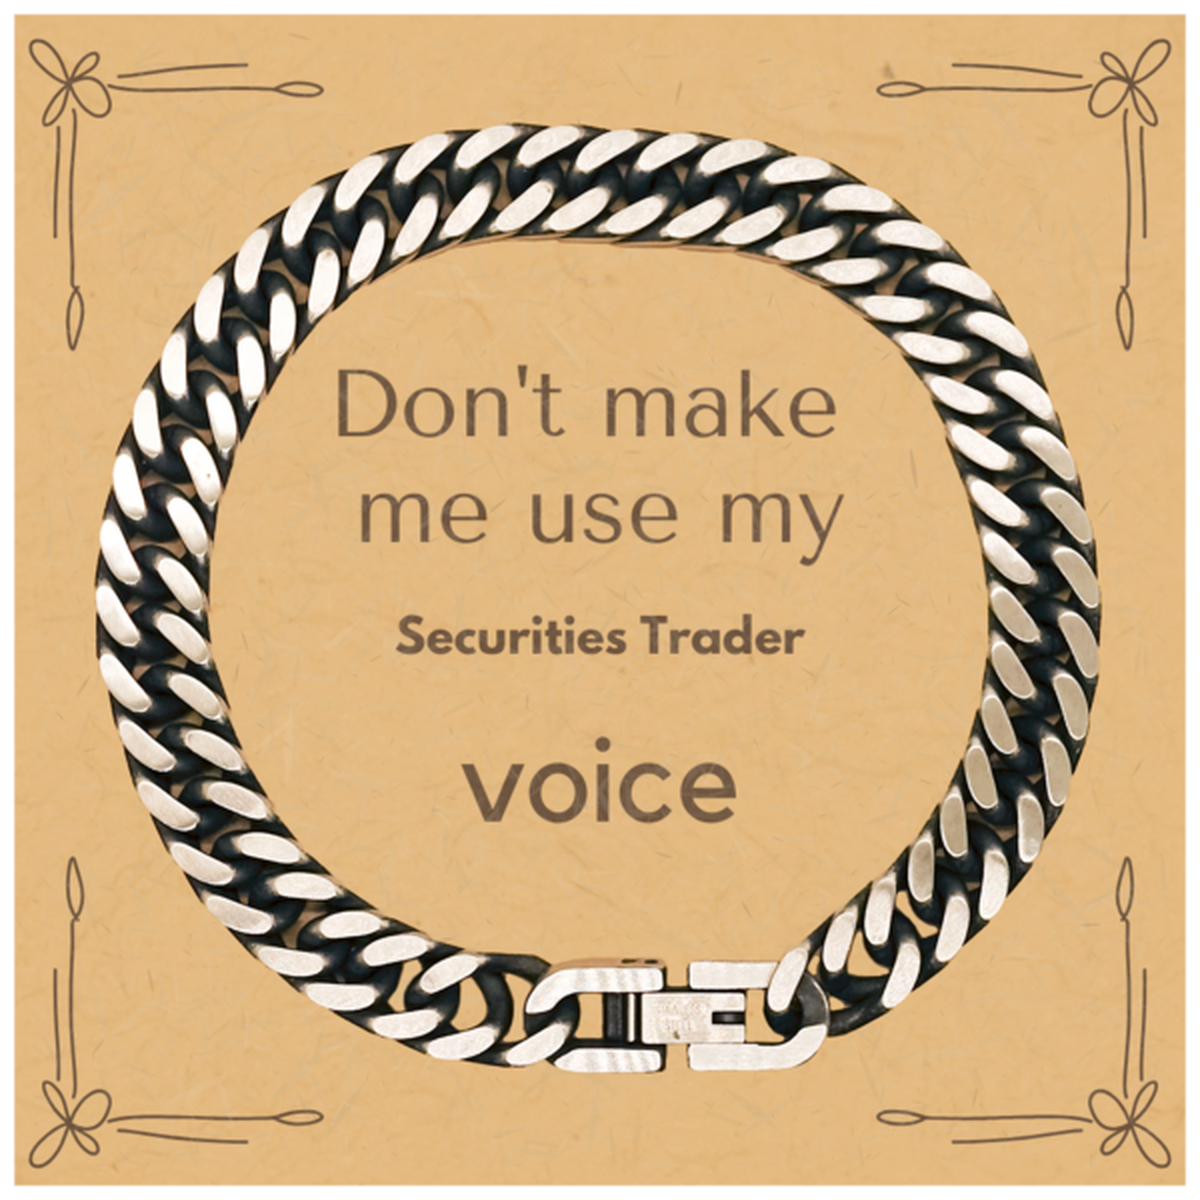 Don't make me use my Securities Trader voice, Sarcasm Securities Trader Card Gifts, Christmas Securities Trader Cuban Link Chain Bracelet Birthday Unique Gifts For Securities Trader Coworkers, Men, Women, Colleague, Friends